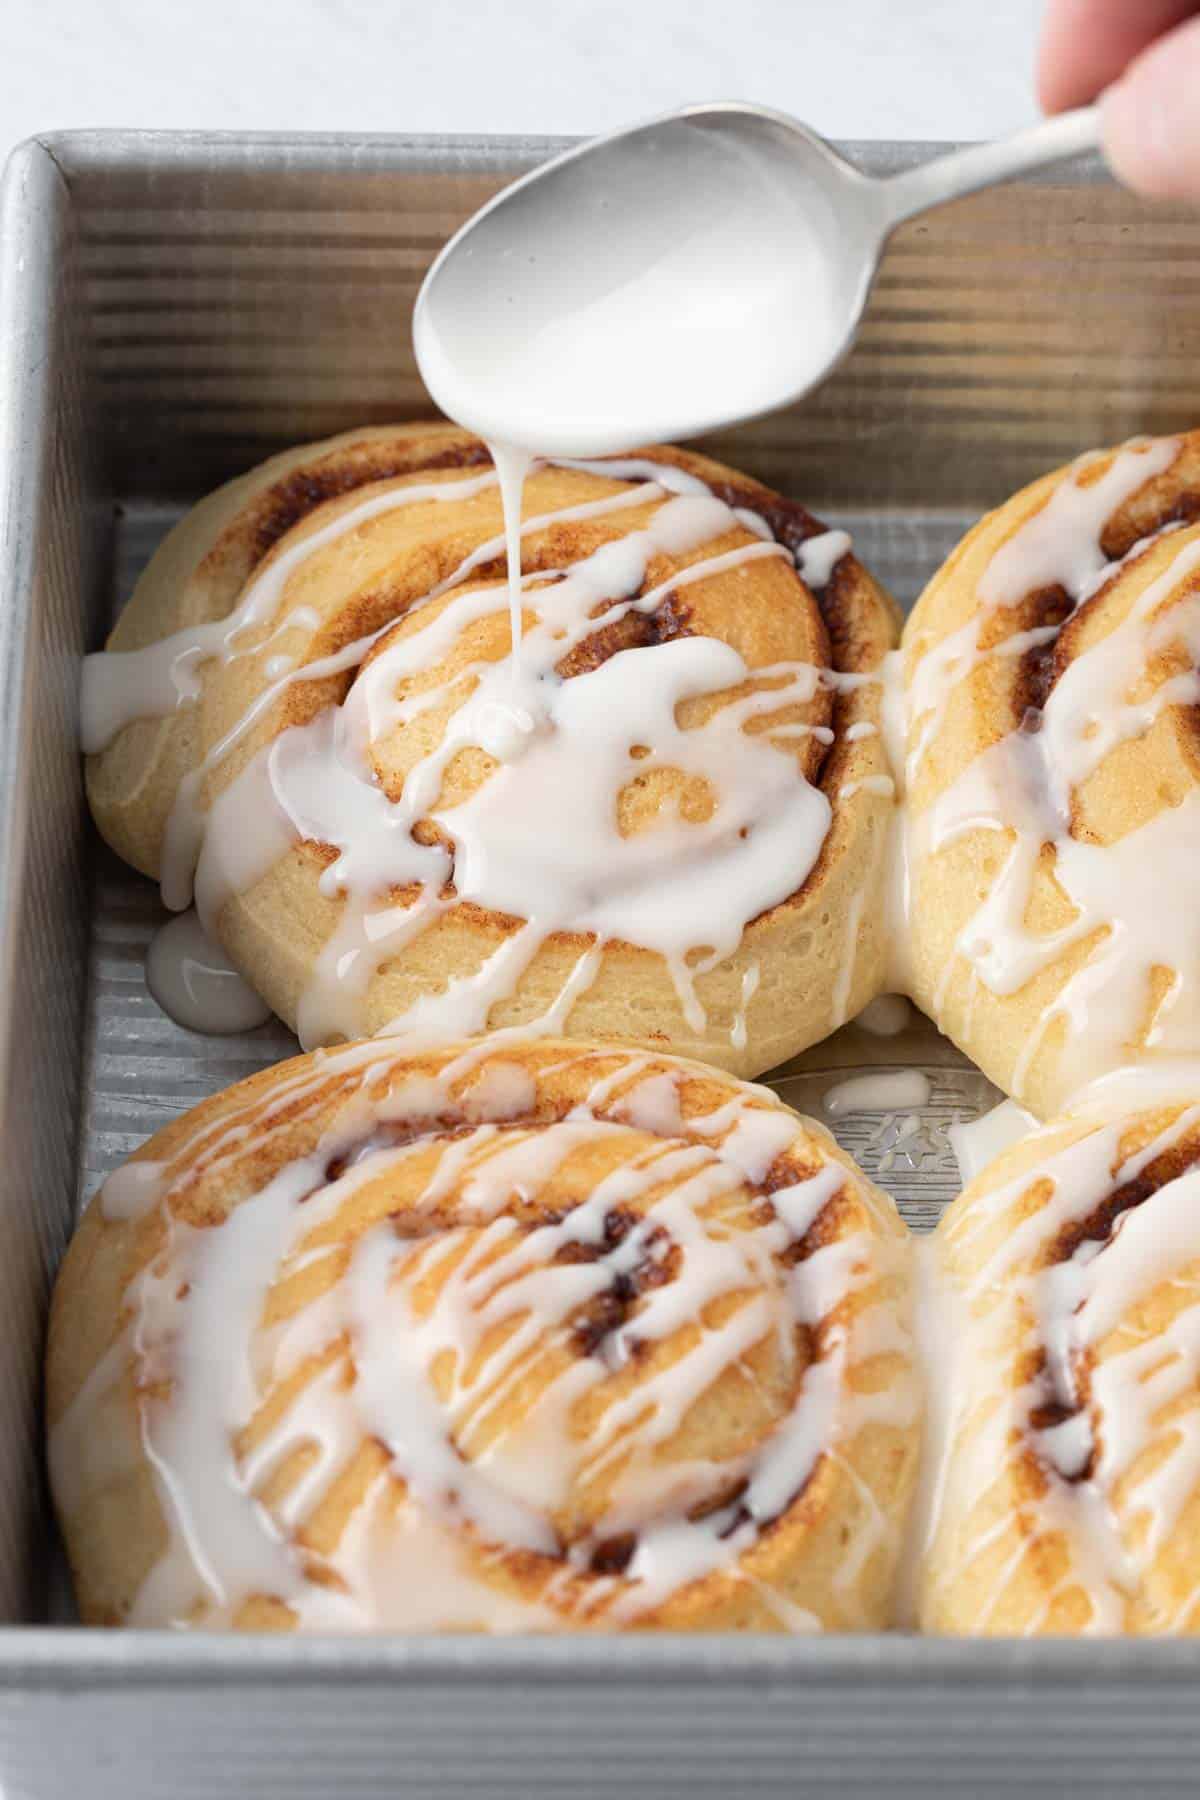 Icing being drizzled on top of cinnamon rolls in a baking dish.